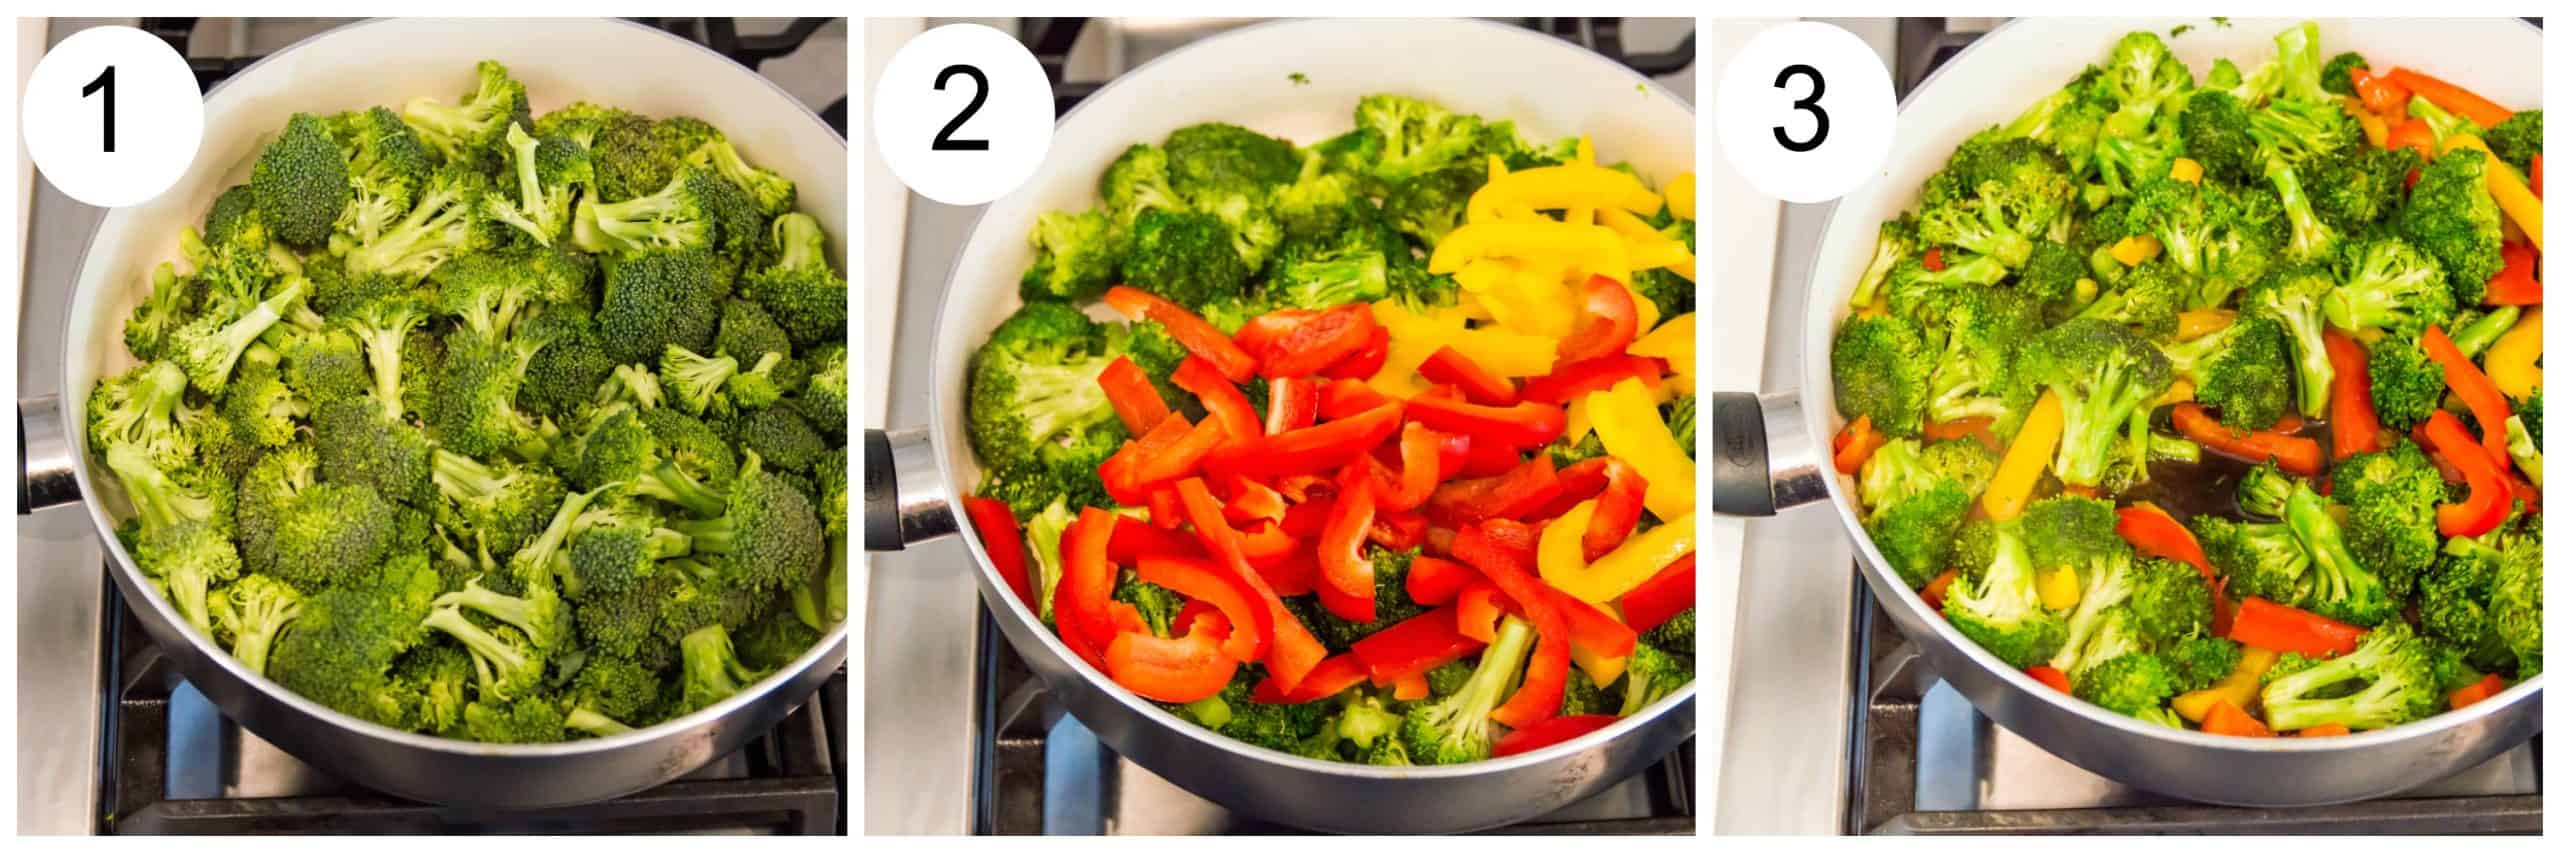 Step by step directions for making teriyaki broccoli and peppers in a pan on the stovetop.